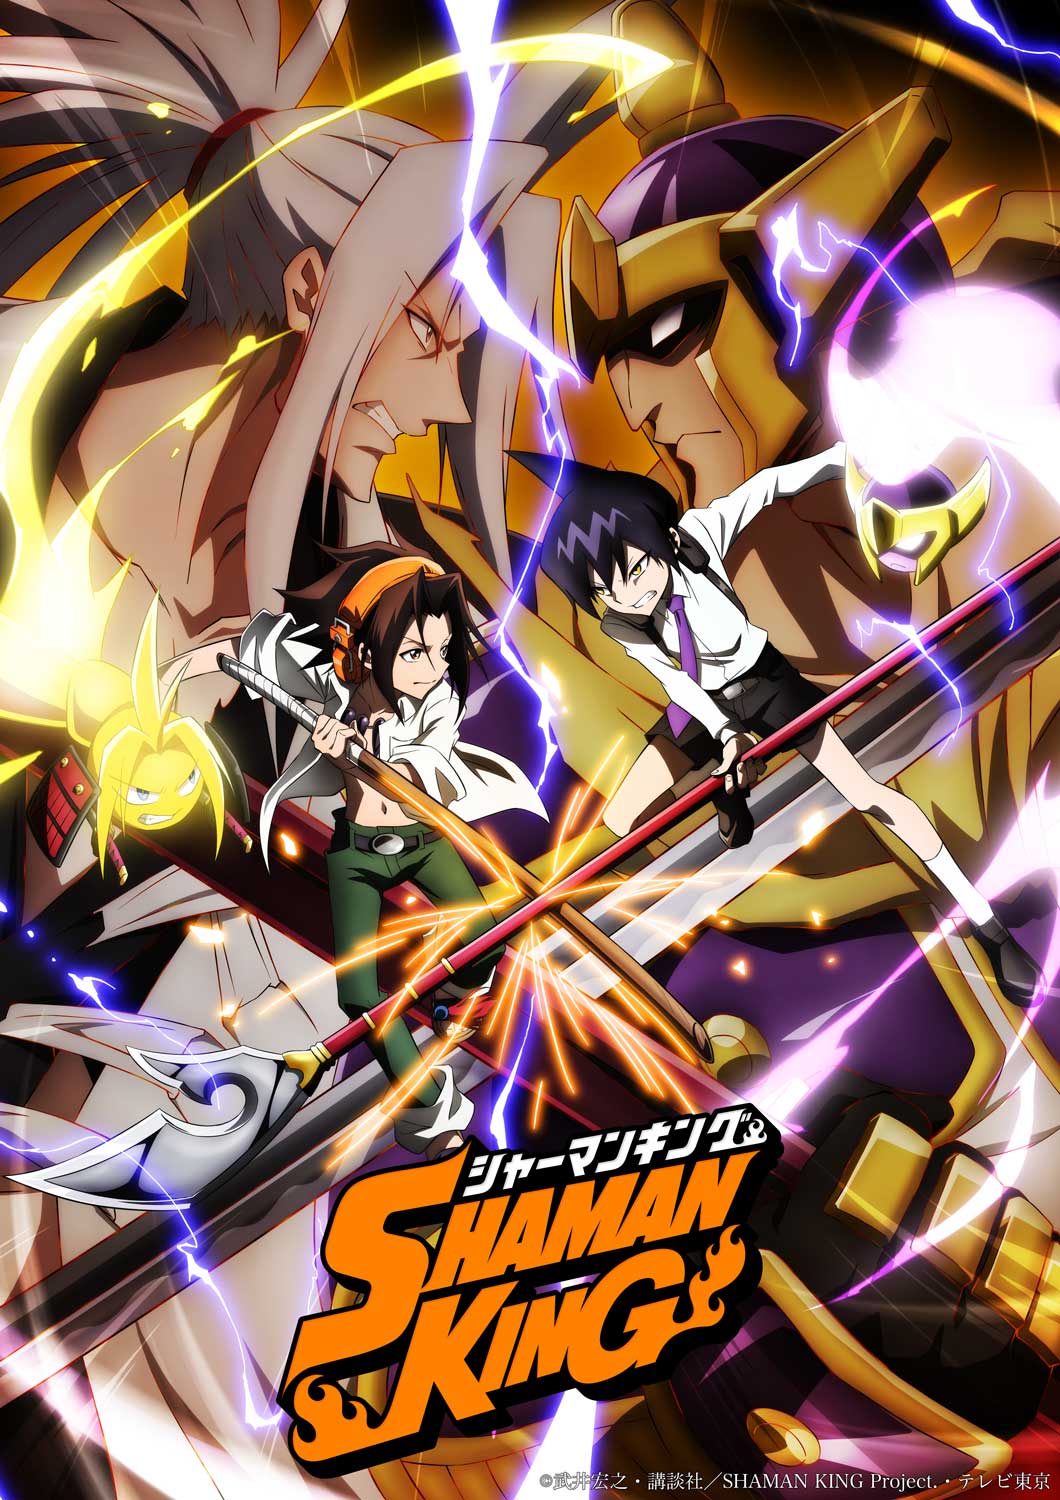 Shaman King announces sequel with an official trailer